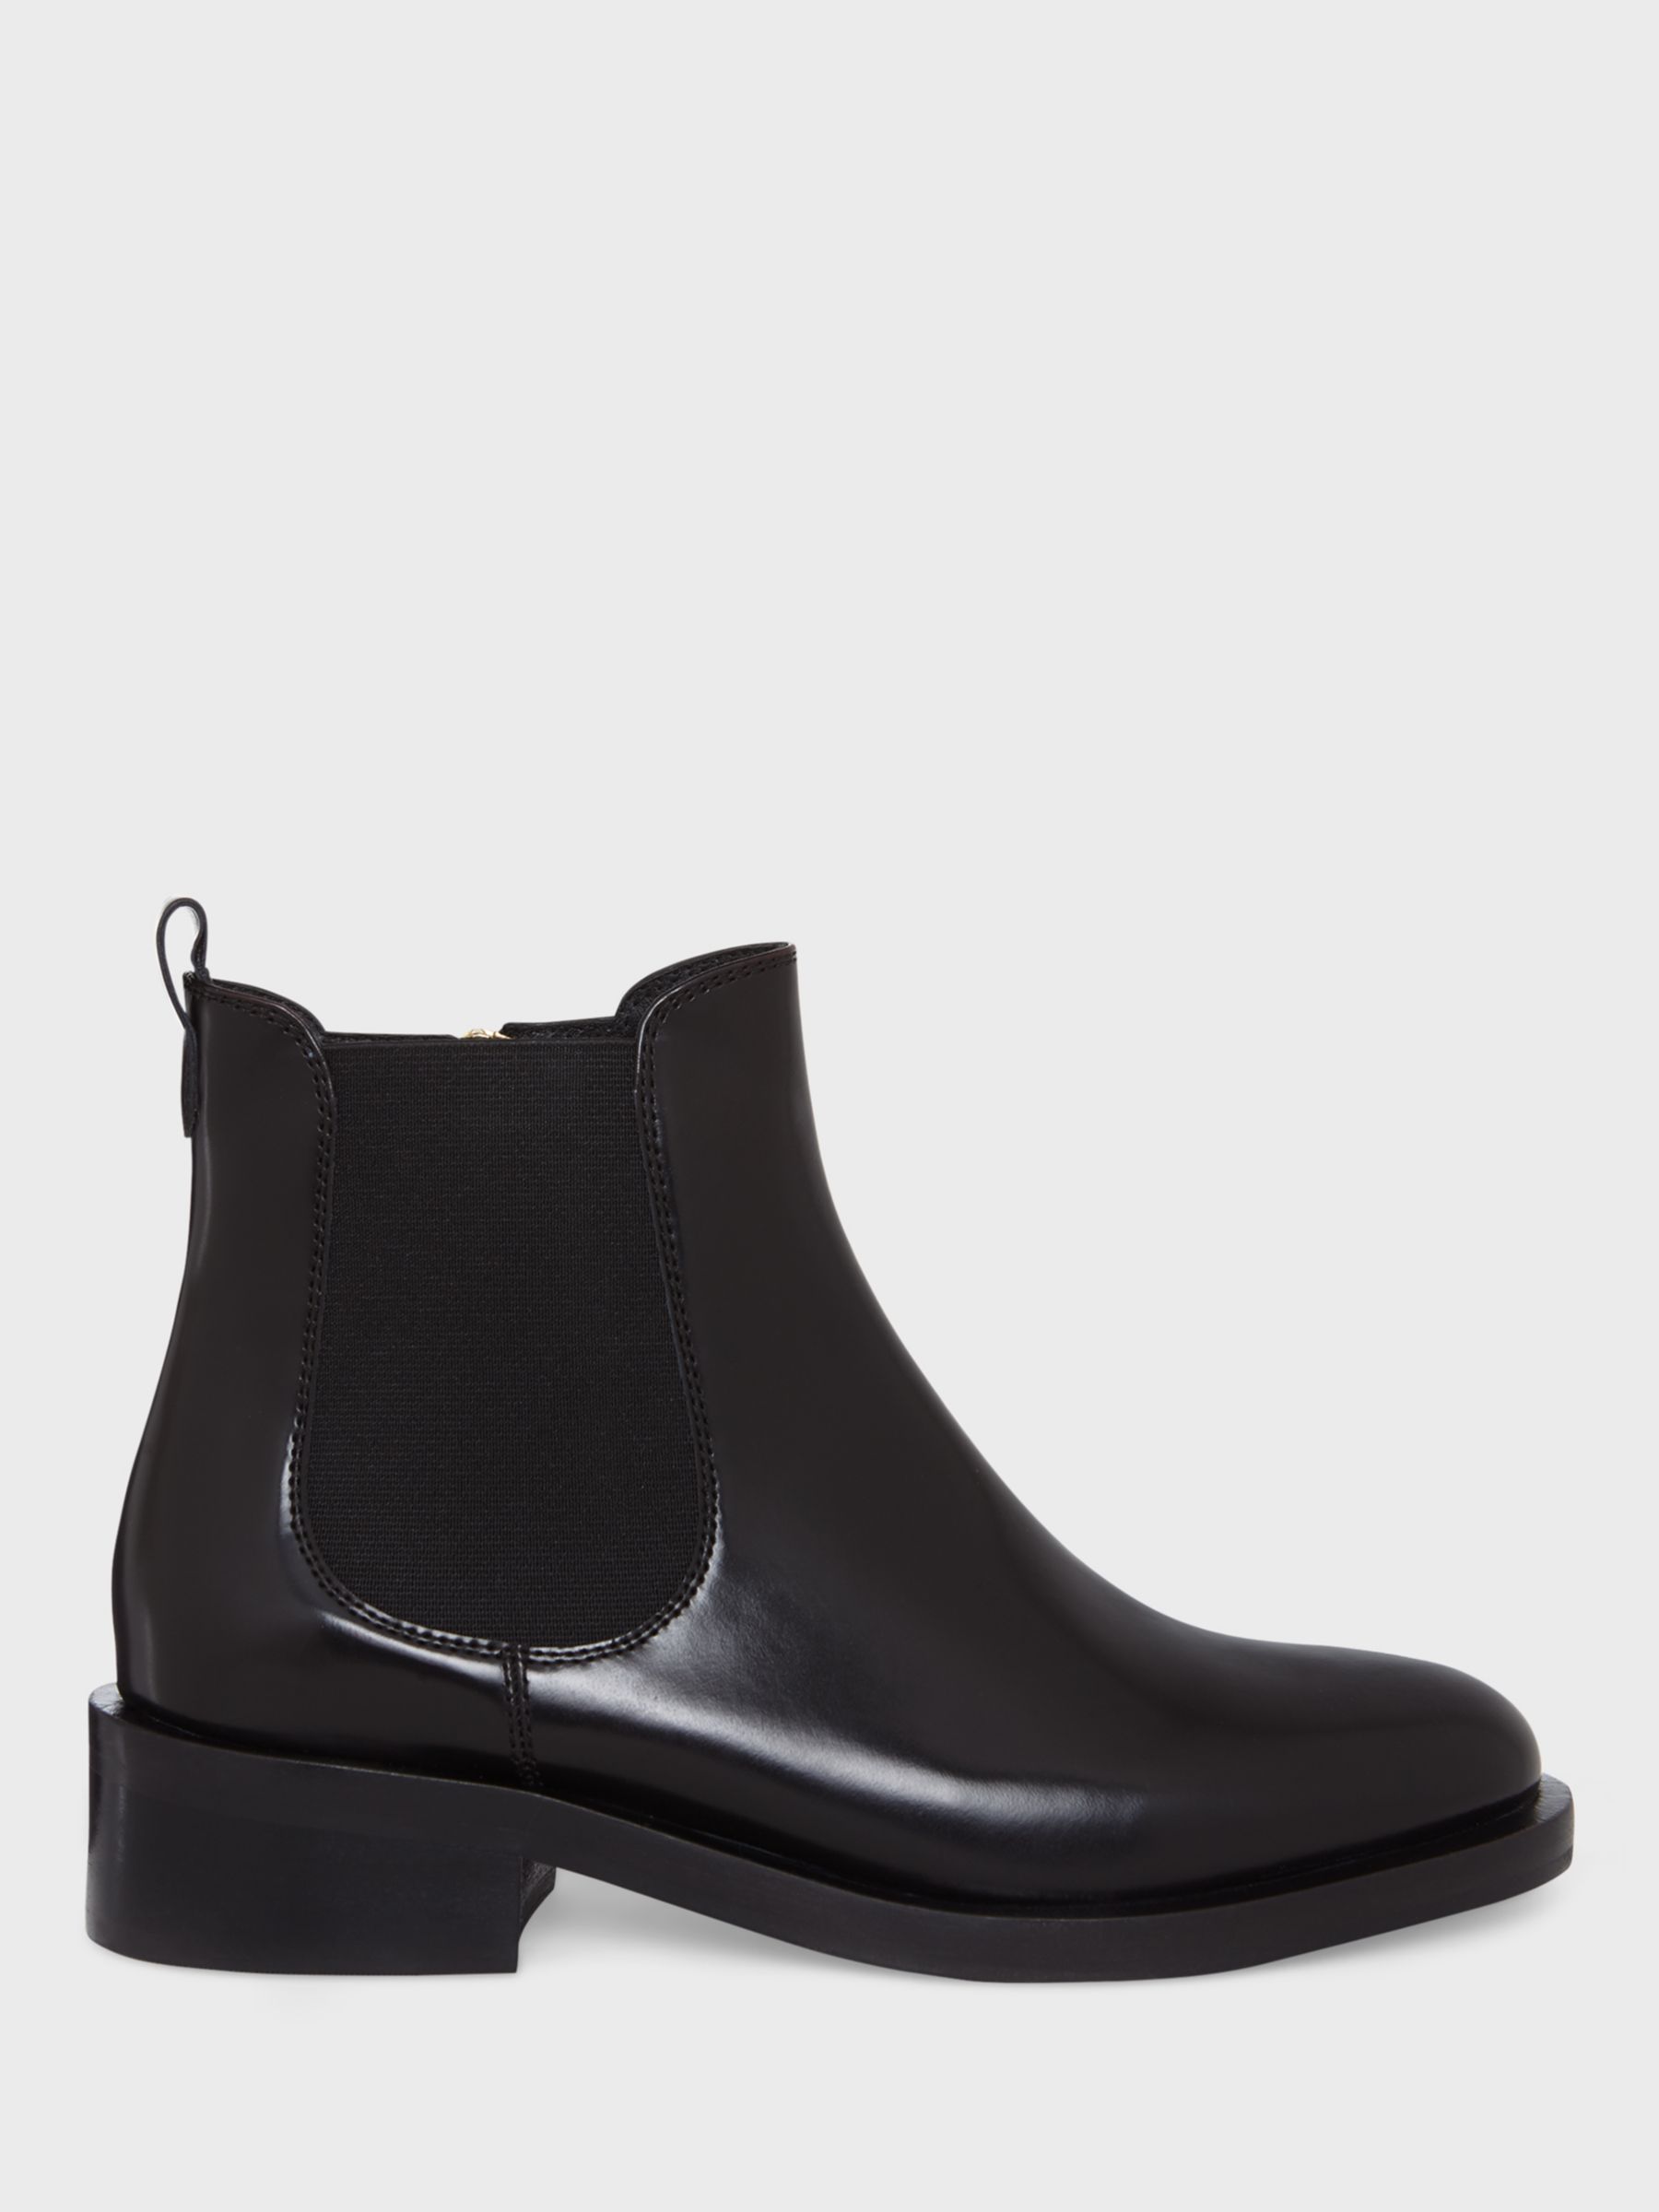 Hobbs Bethany Leather Chelsea Boots, Black at John Lewis & Partners